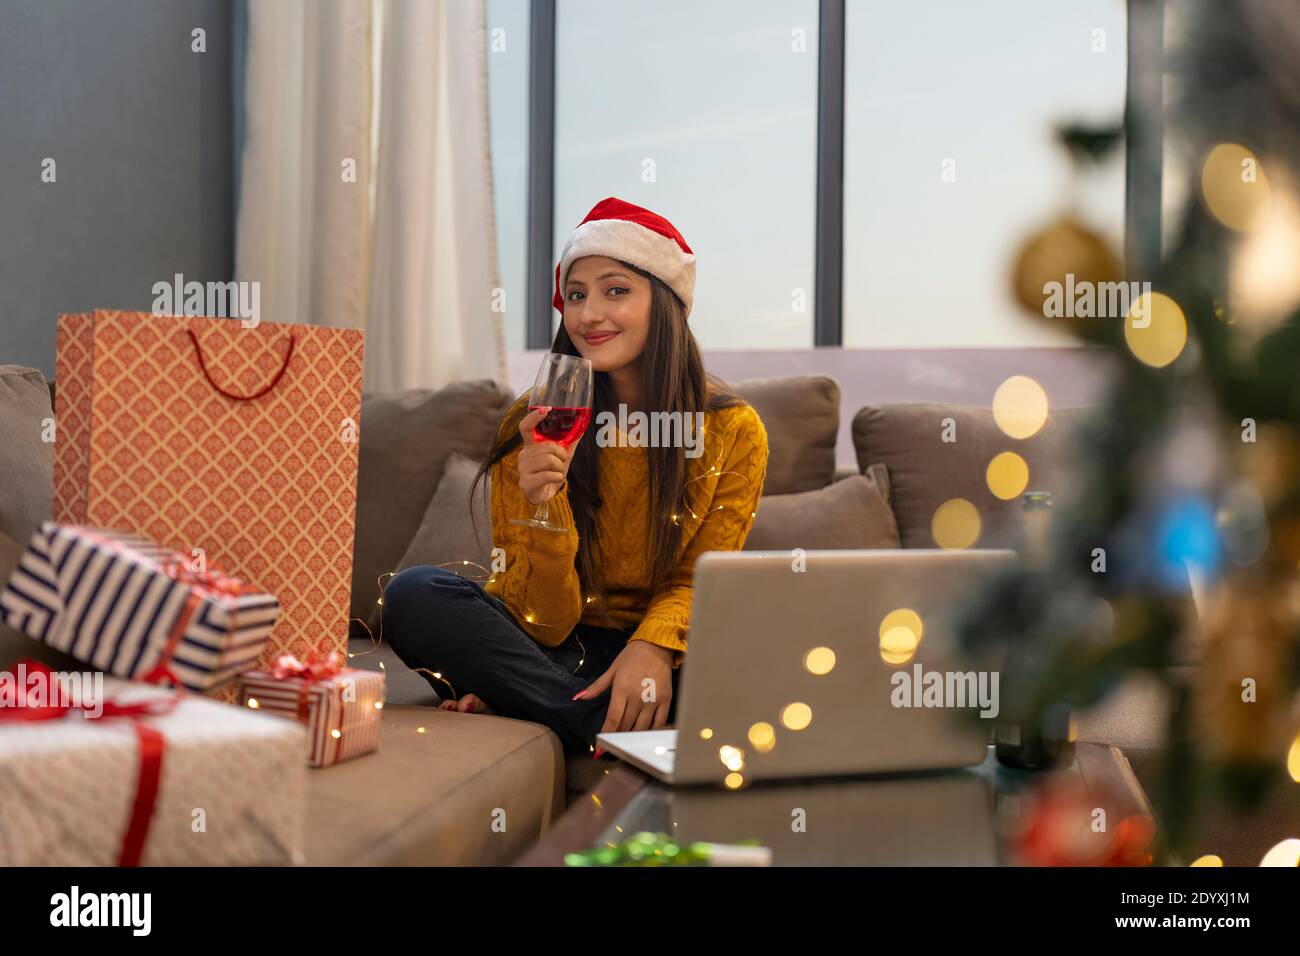 Happy Woman Making Video Call During Christmas wine party Celebration holding wine glass Stock Photo